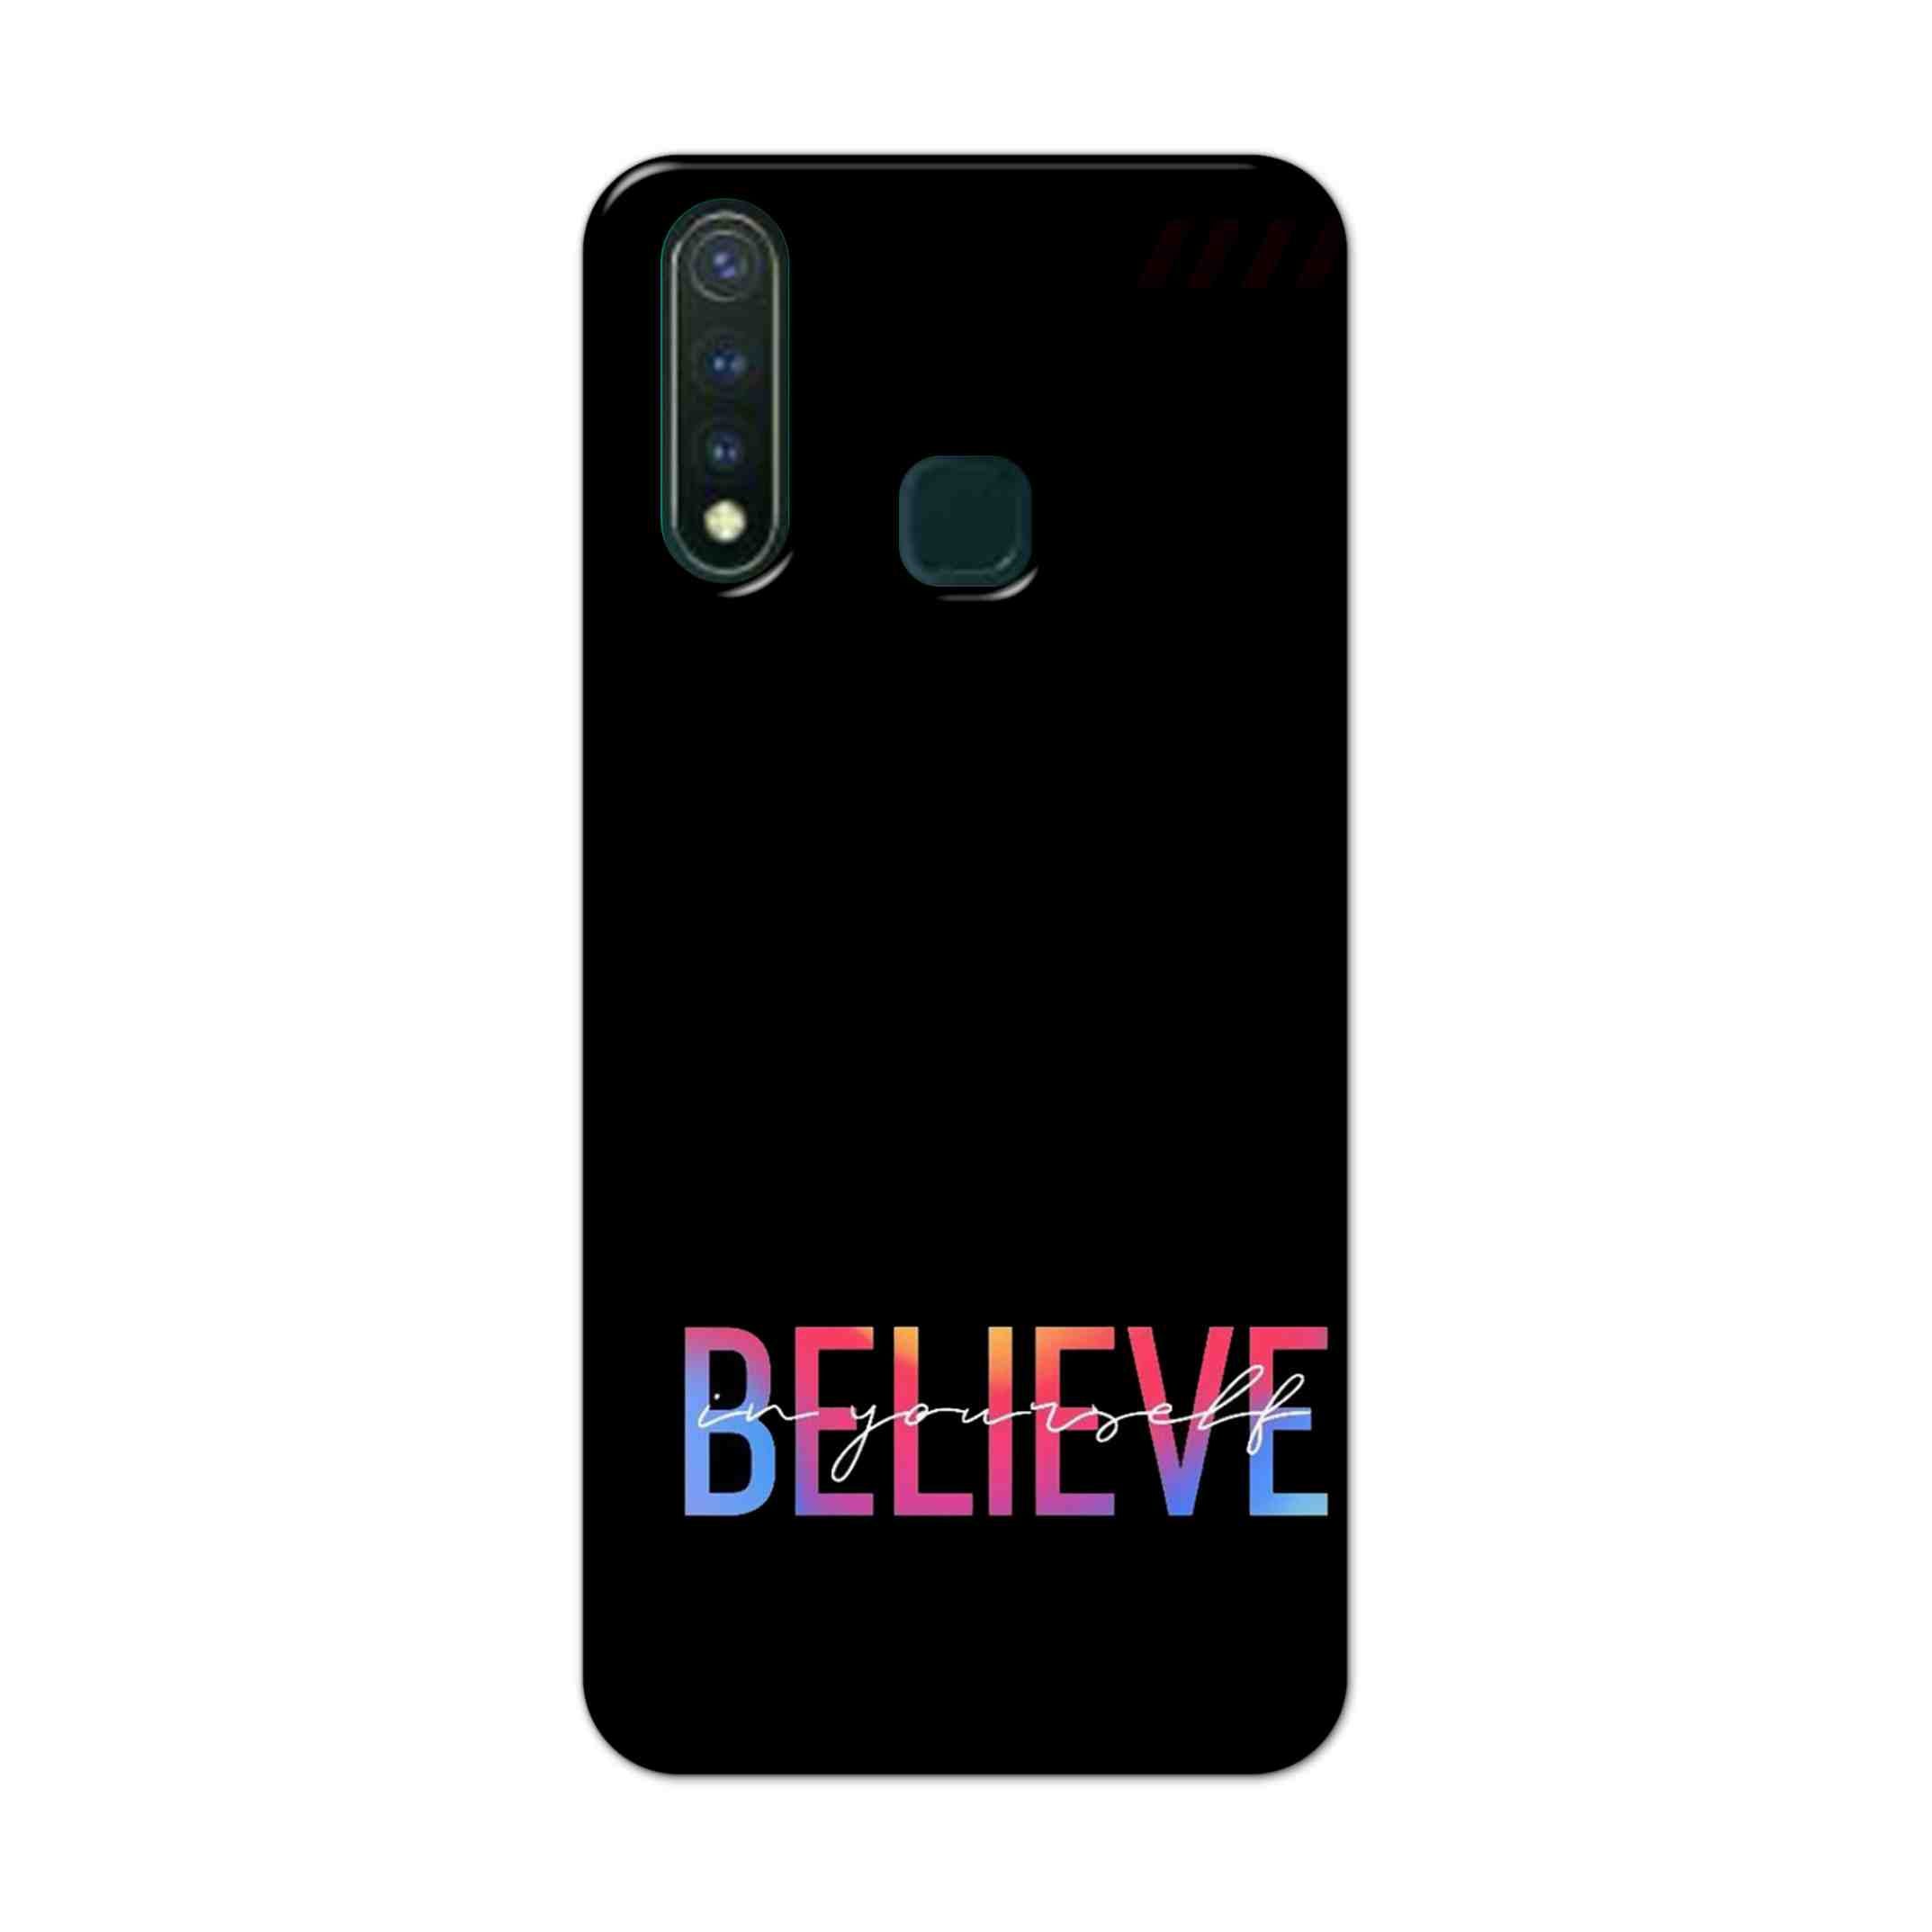 Buy Believe Hard Back Mobile Phone Case Cover For Vivo Y19 Online